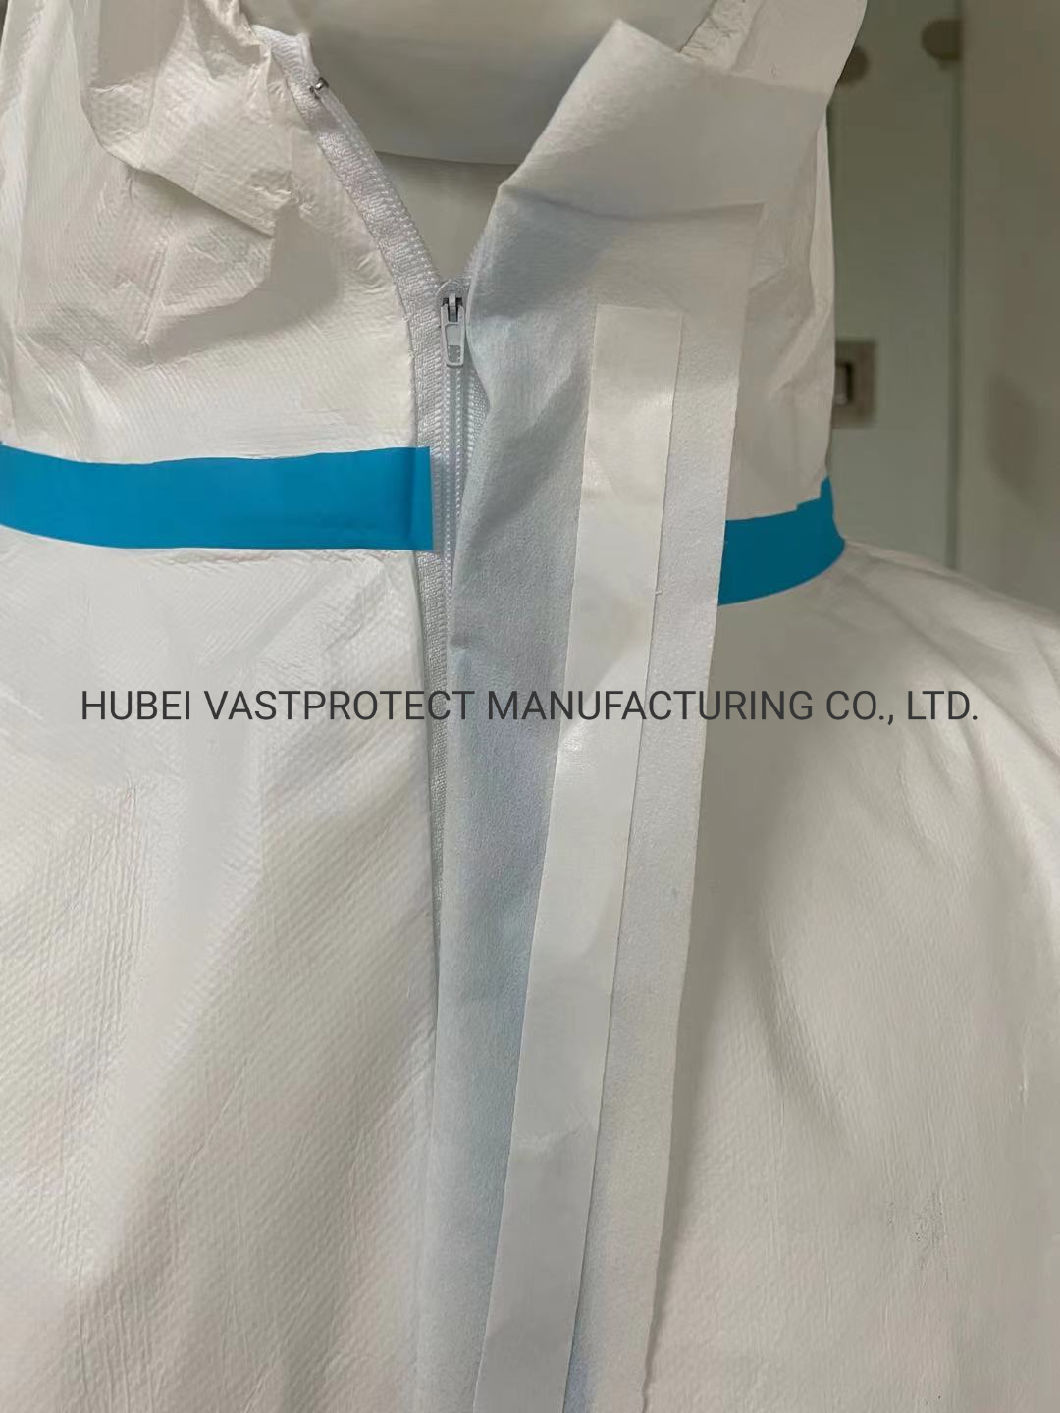 CE Certificate En14126 Cat 3 Type 4/5/6 Disposable White Coverall with Blue Tape